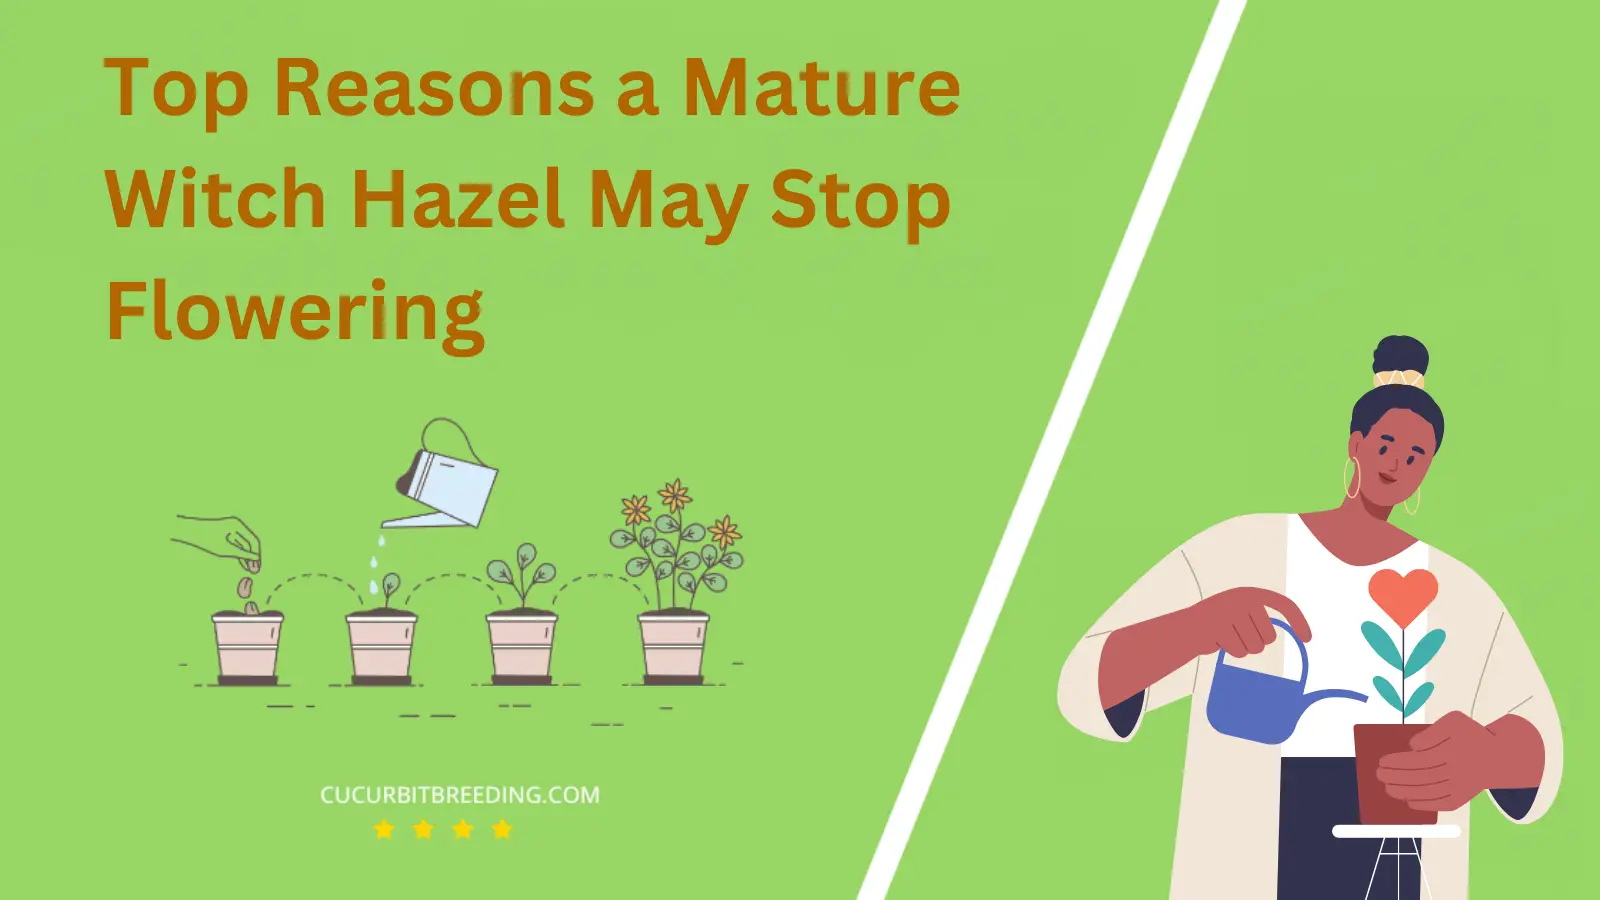 Top Reasons a Mature Witch Hazel May Stop Flowering